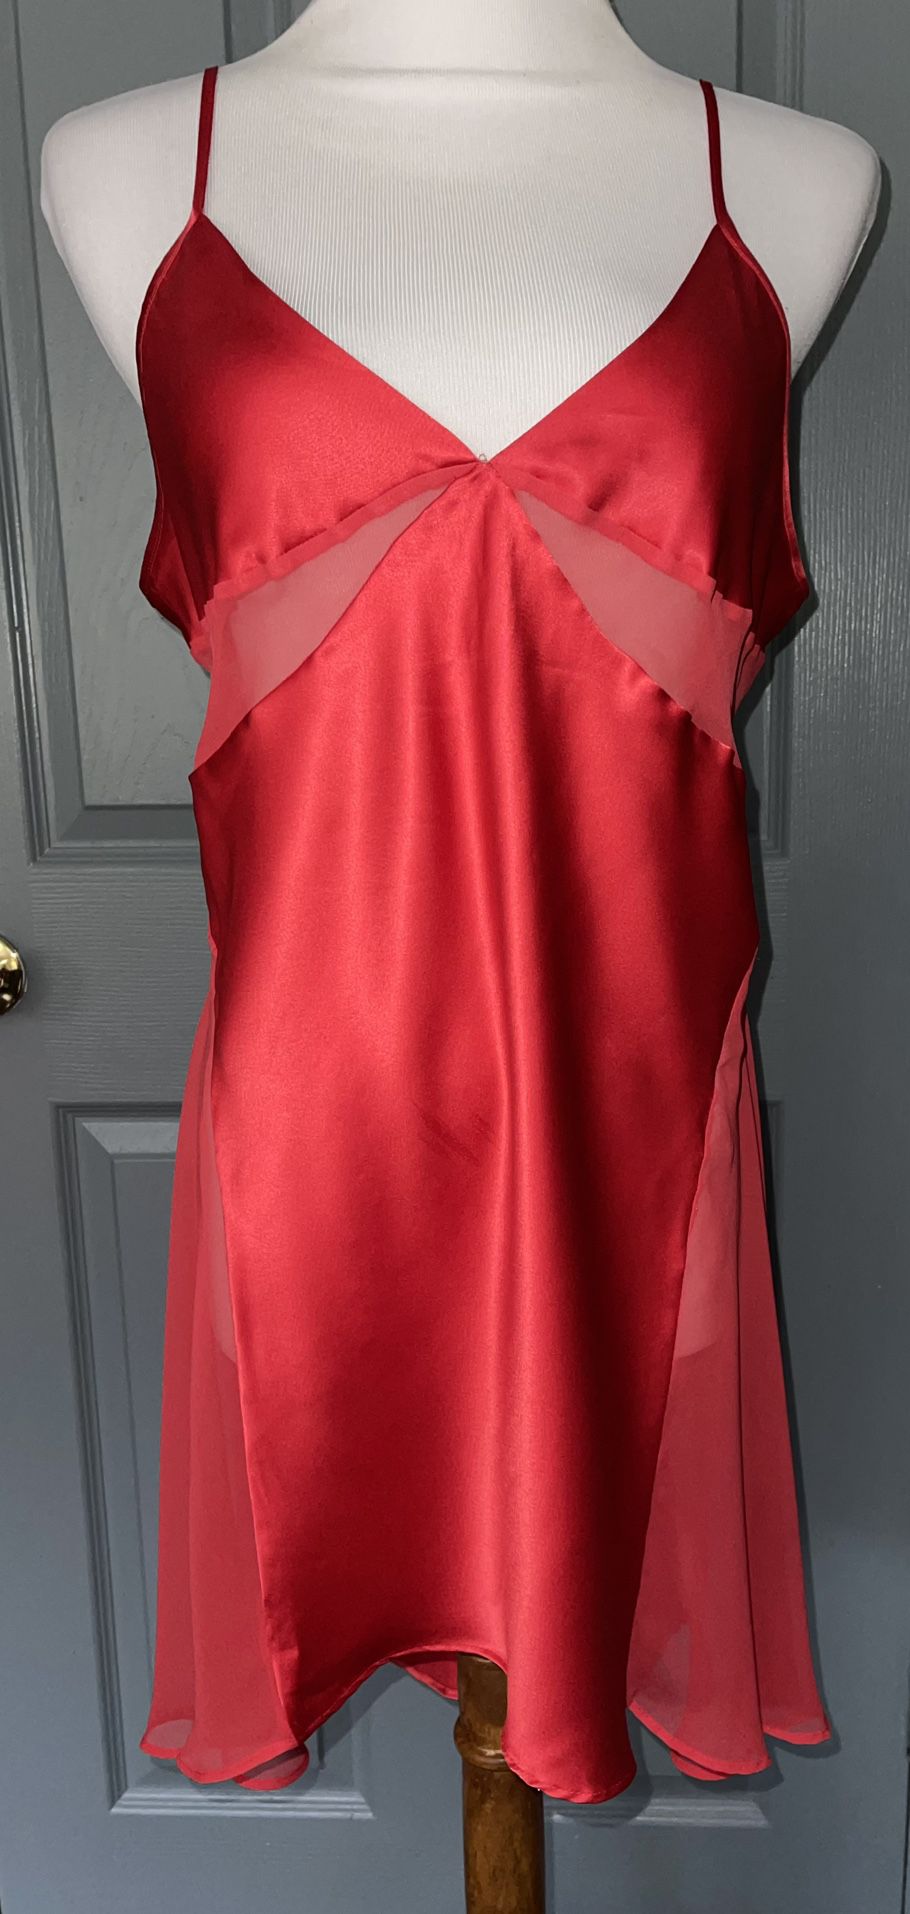 Victoria's Secret red satin & Organza chemise nightgown. Large. 